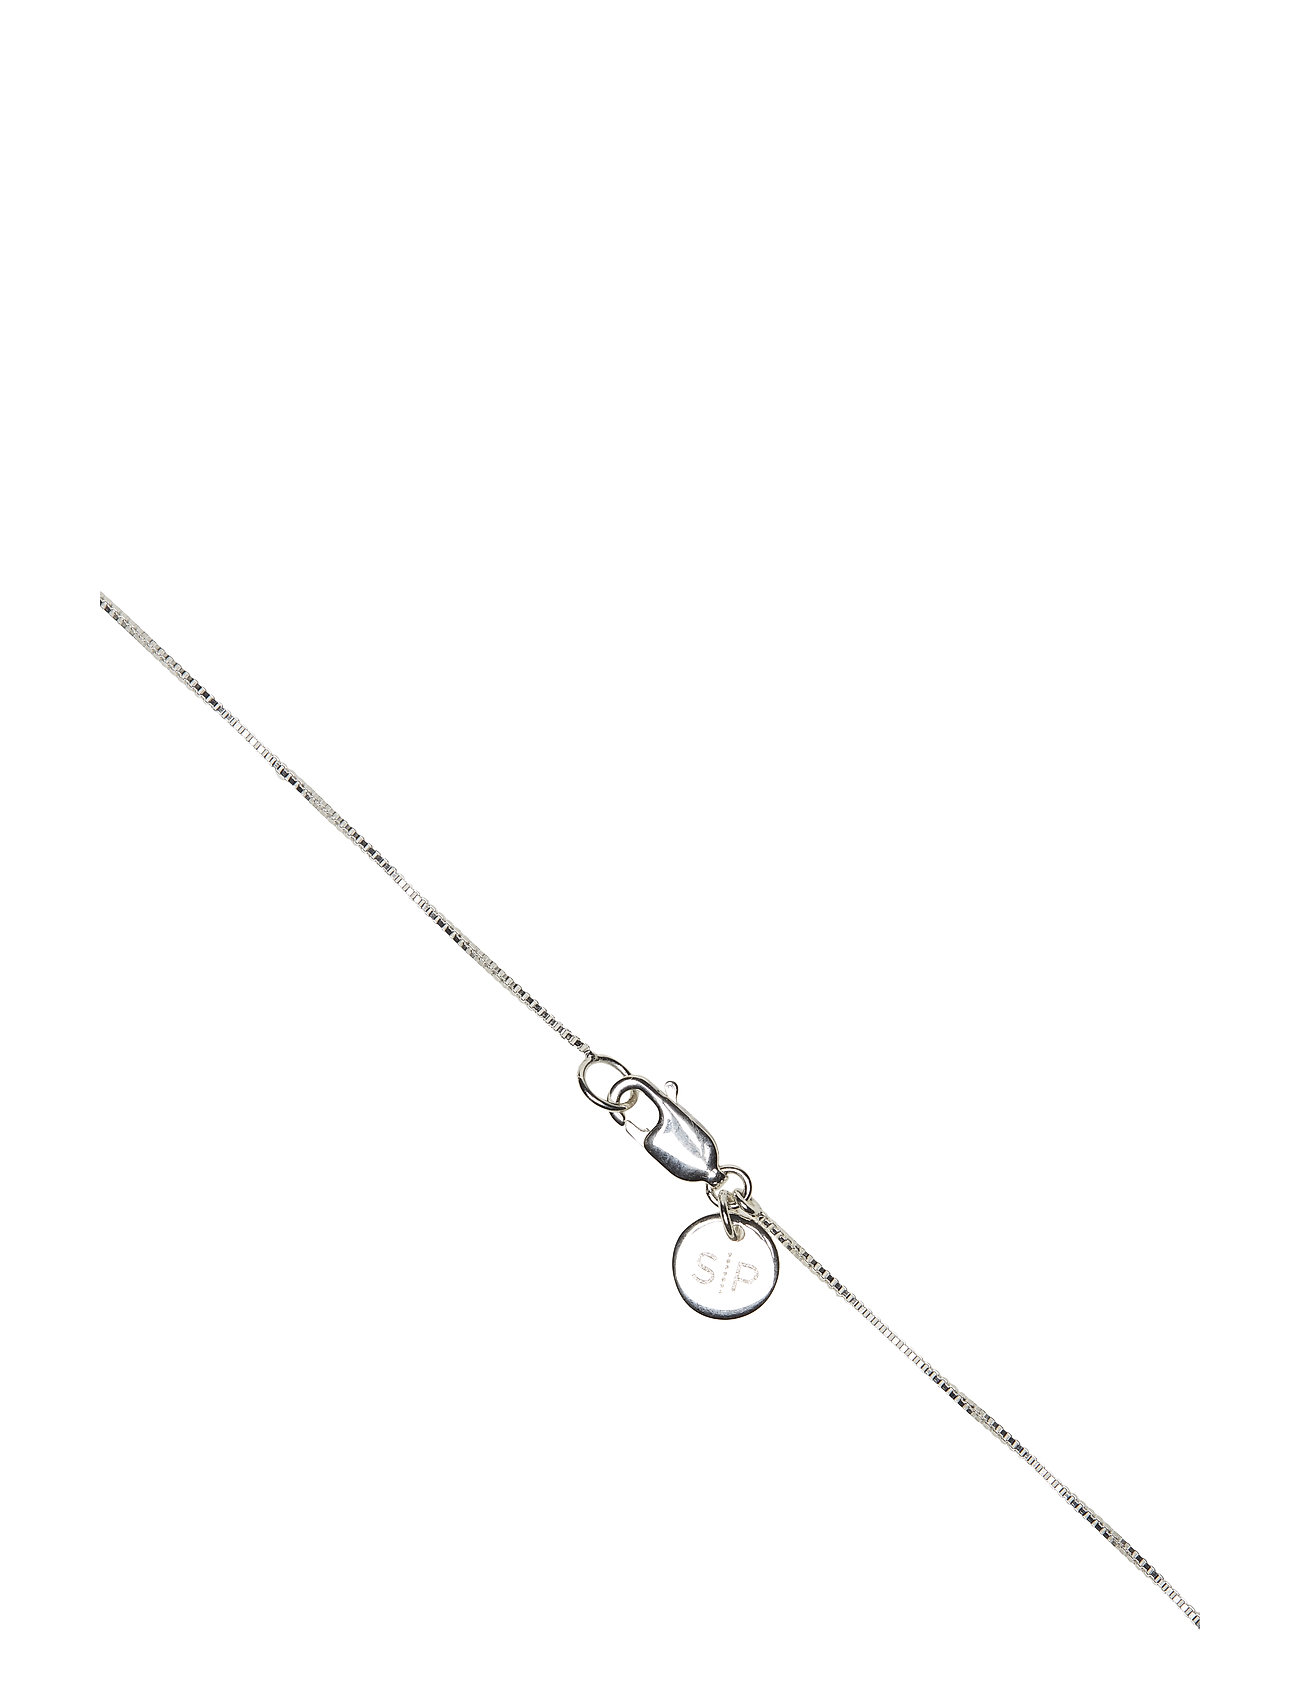 Snap Necklace Love Silver Accessories Jewellery Necklaces Dainty Necklaces Sølv Syster P